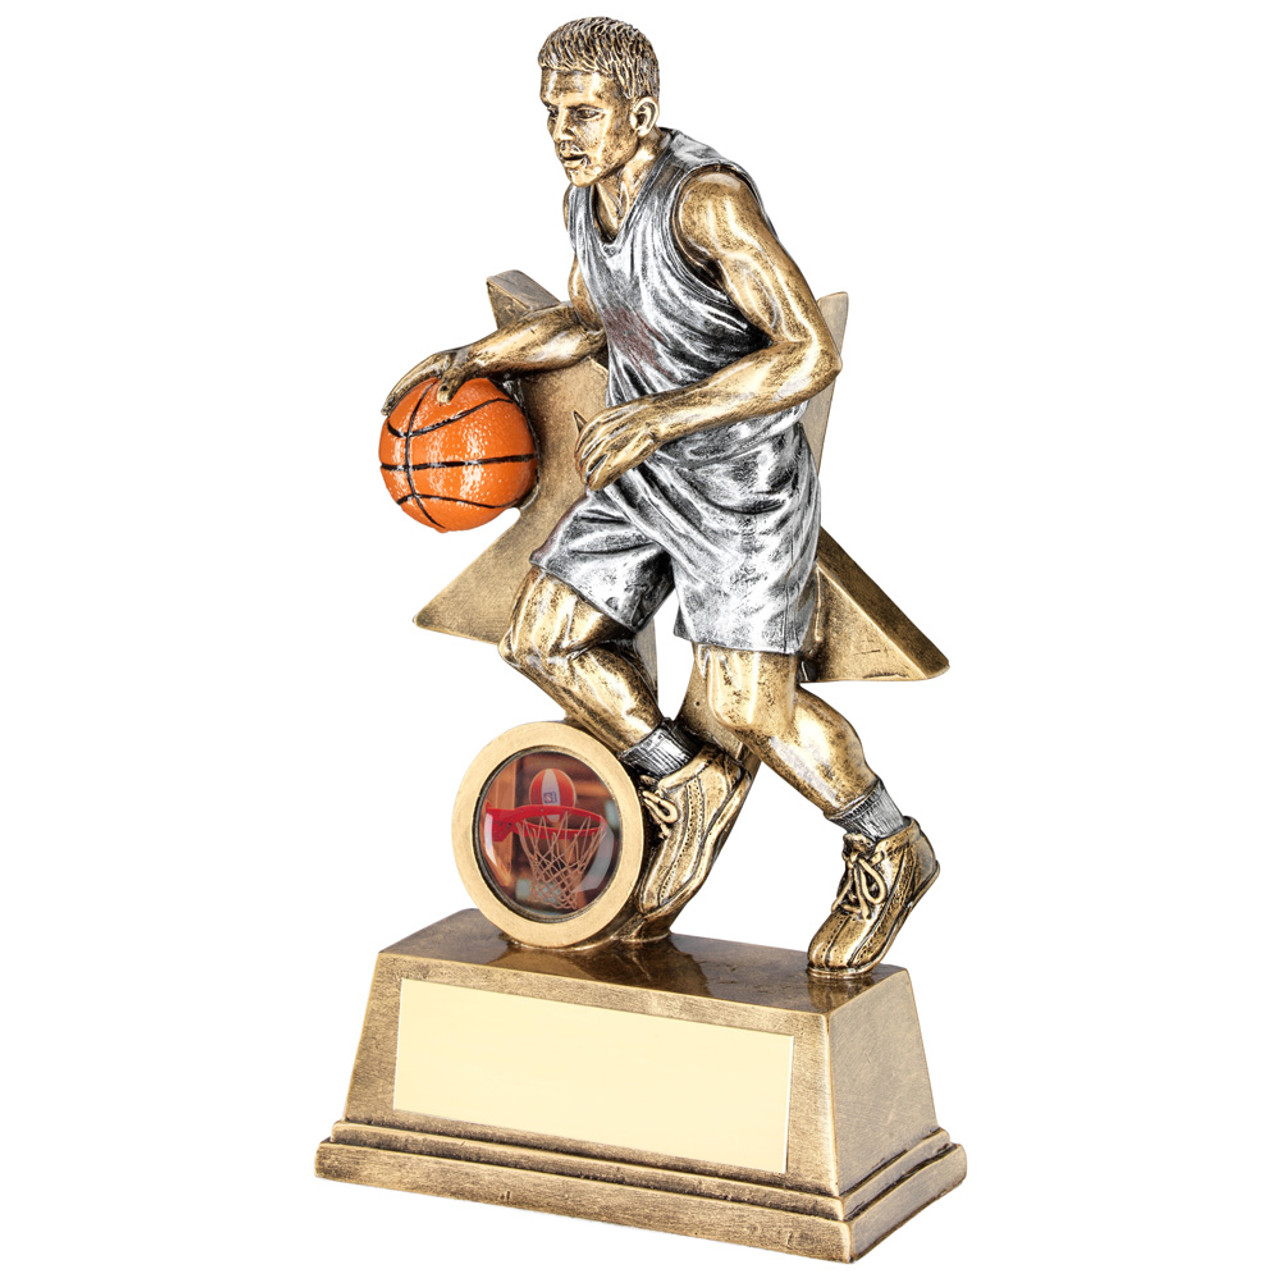 Resin basketball player figure trophy. 2 sizes at excellent prices and FREE personalised engraving included too!